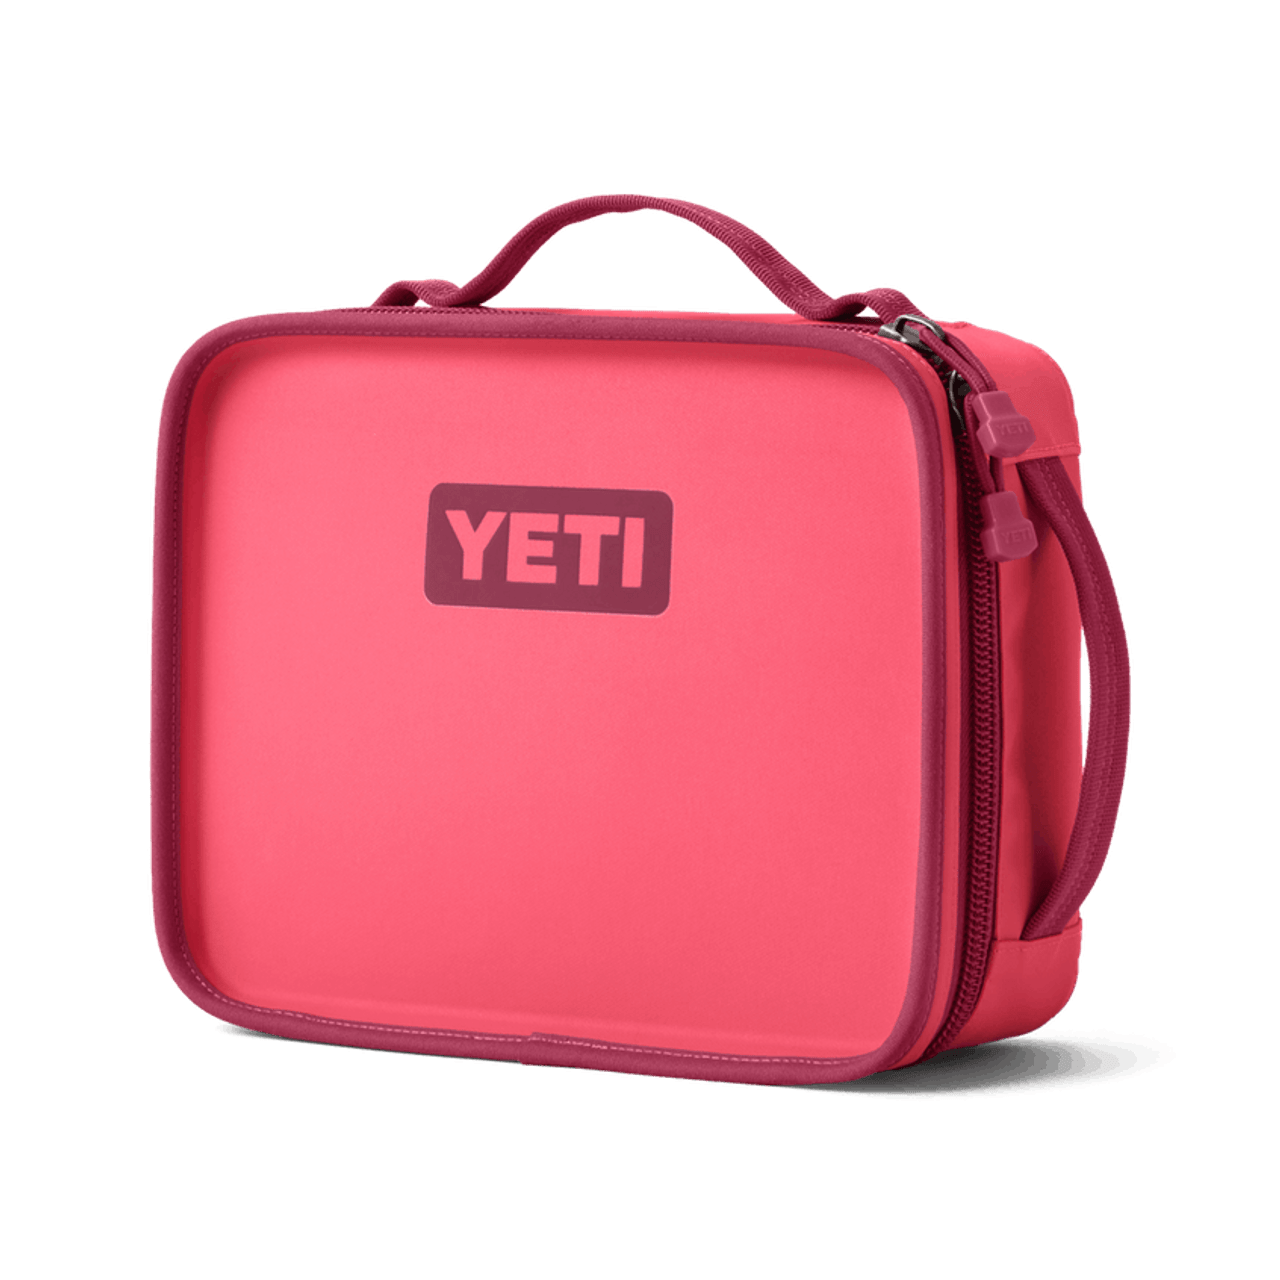 https://cdn11.bigcommerce.com/s-mdle1ql08i/images/stencil/1280x1280/products/7282/10811/yeti-lunch-box-bimini-pink3__73673.1651629923.png?c=2?imbypass=on